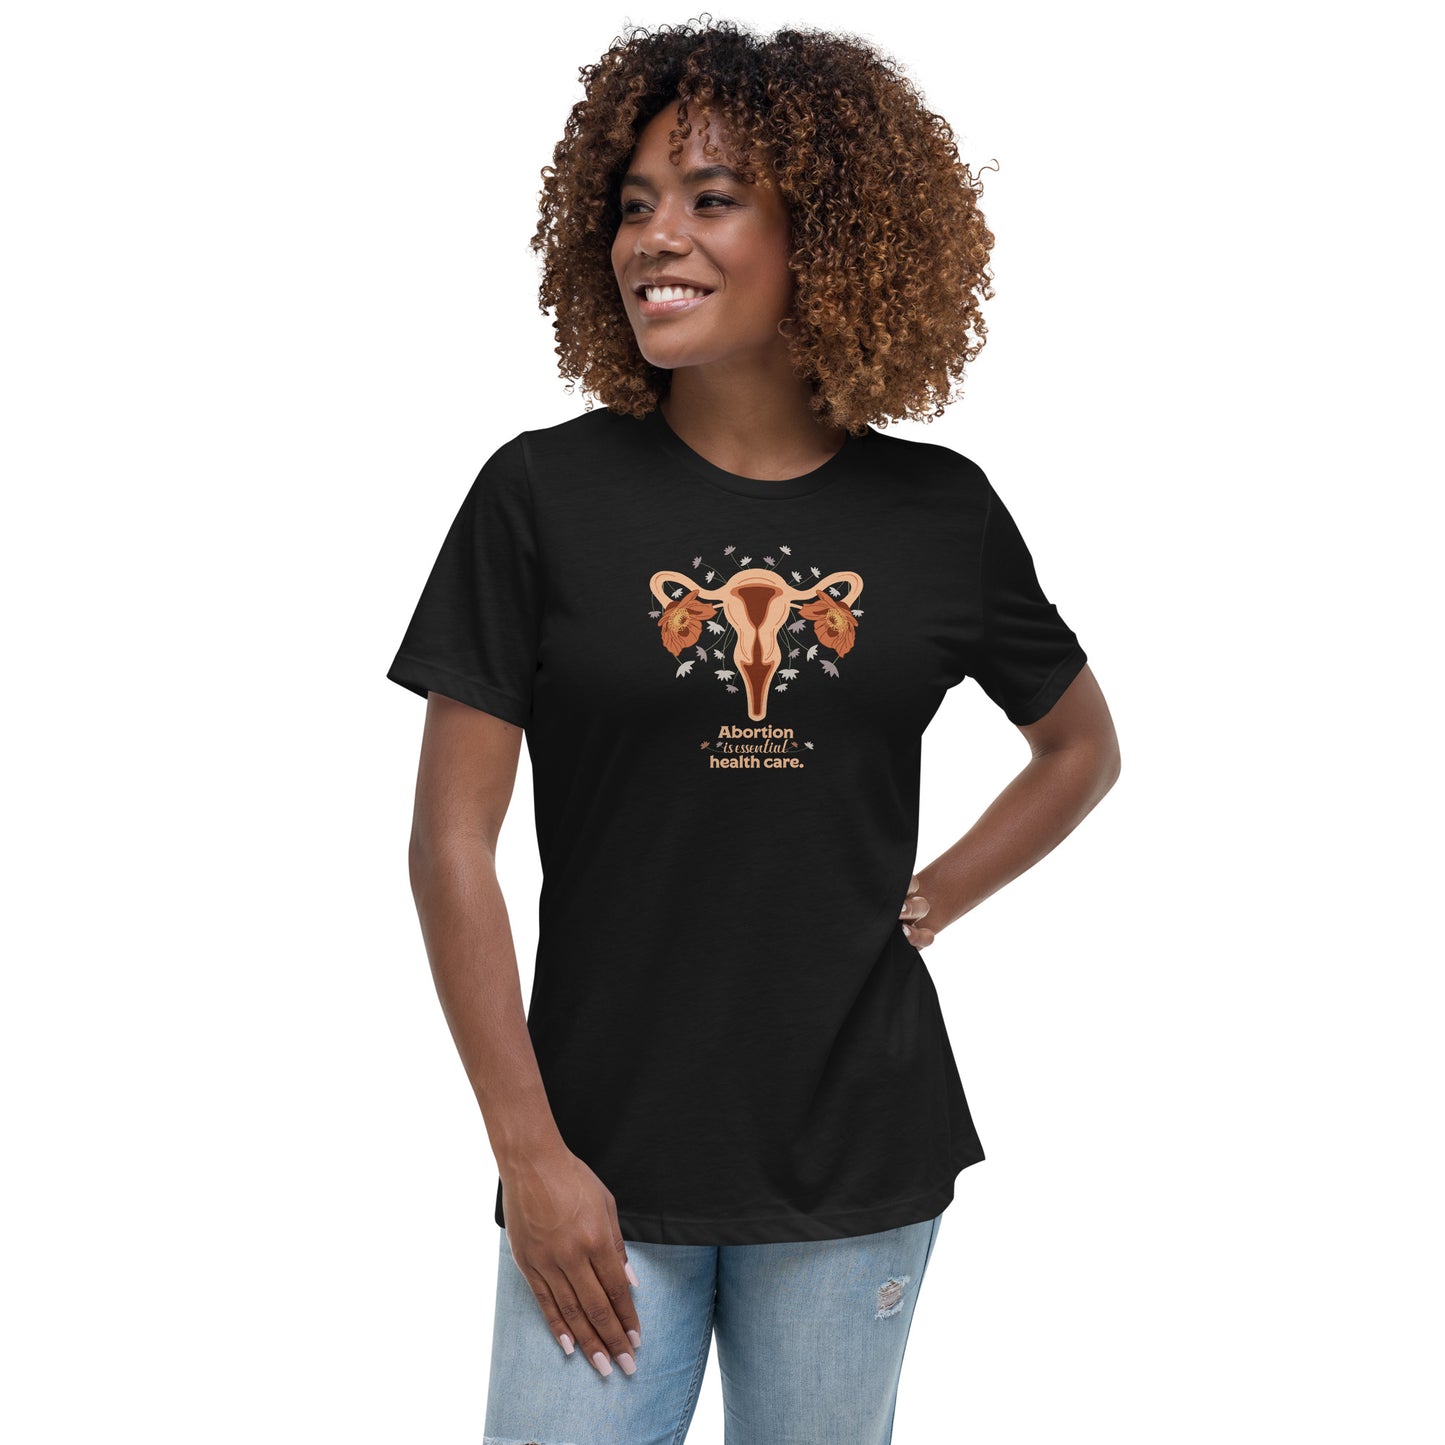 Abortion is Essential Health Care - Relaxed Women's Tee